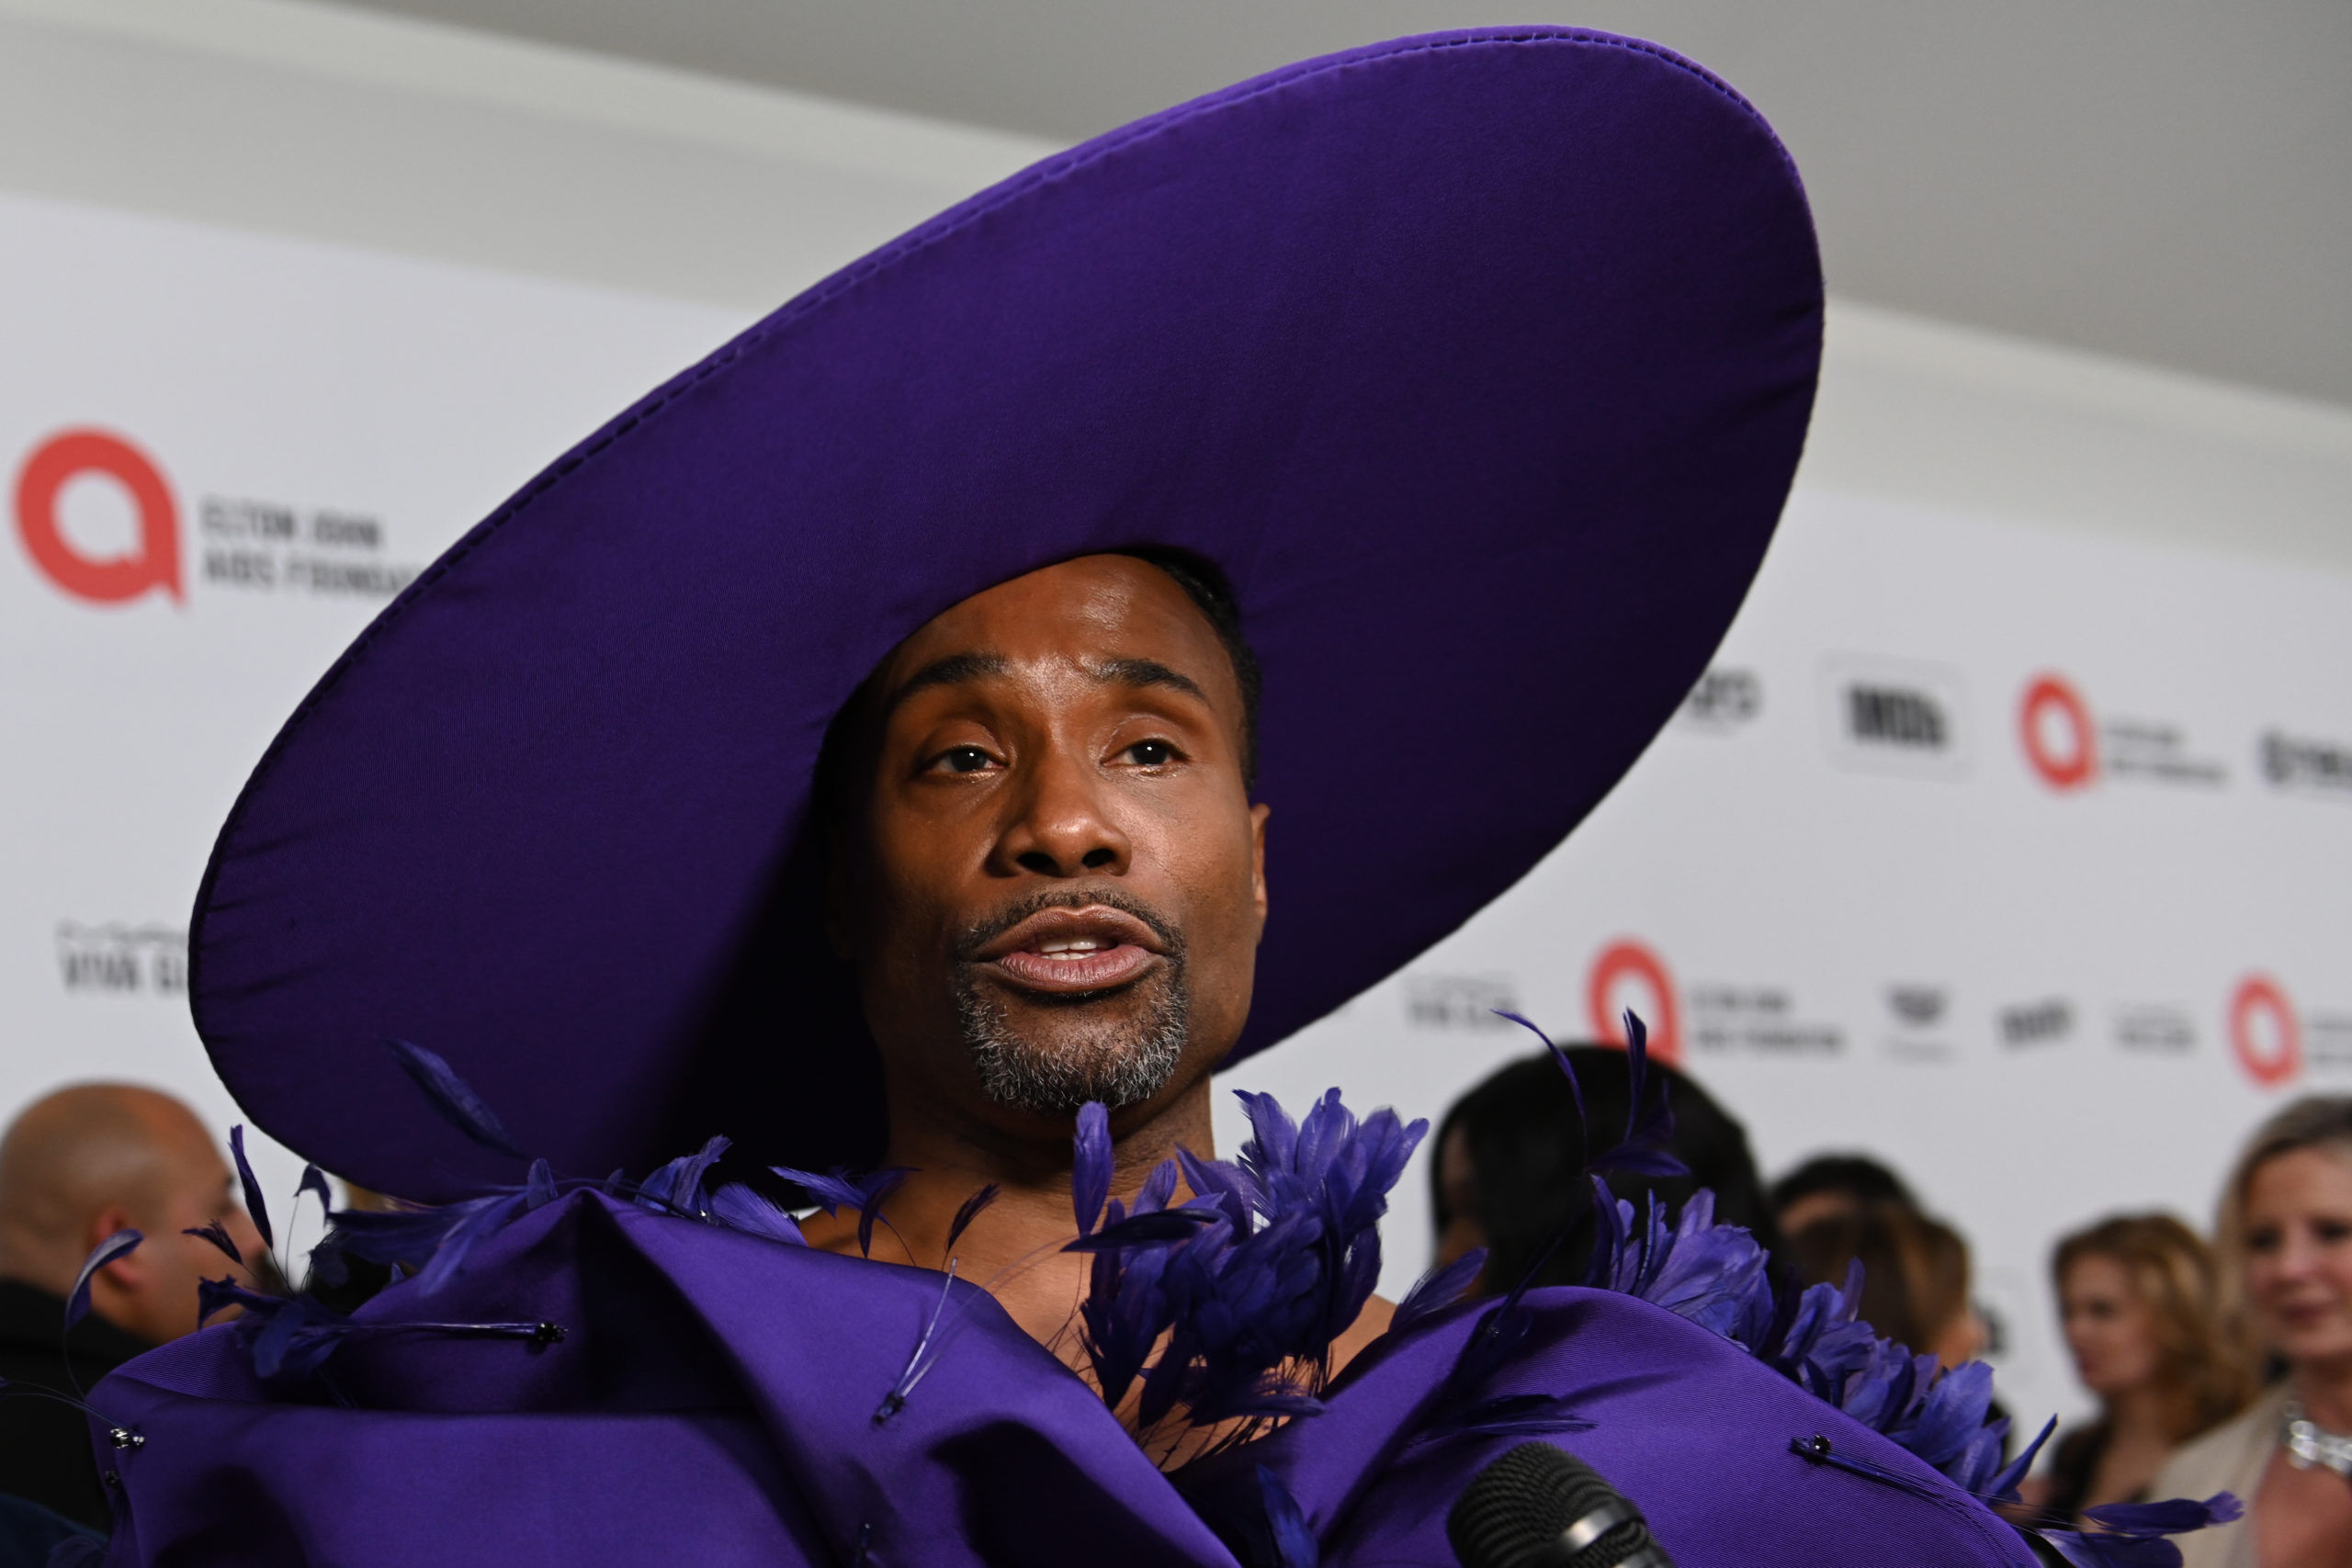 FEBRUARY 09, 2020: Billy Porter walks the red carpet at the Elton John AIDS Foundation Party on February 09, 2020 in Los Angeles, California.